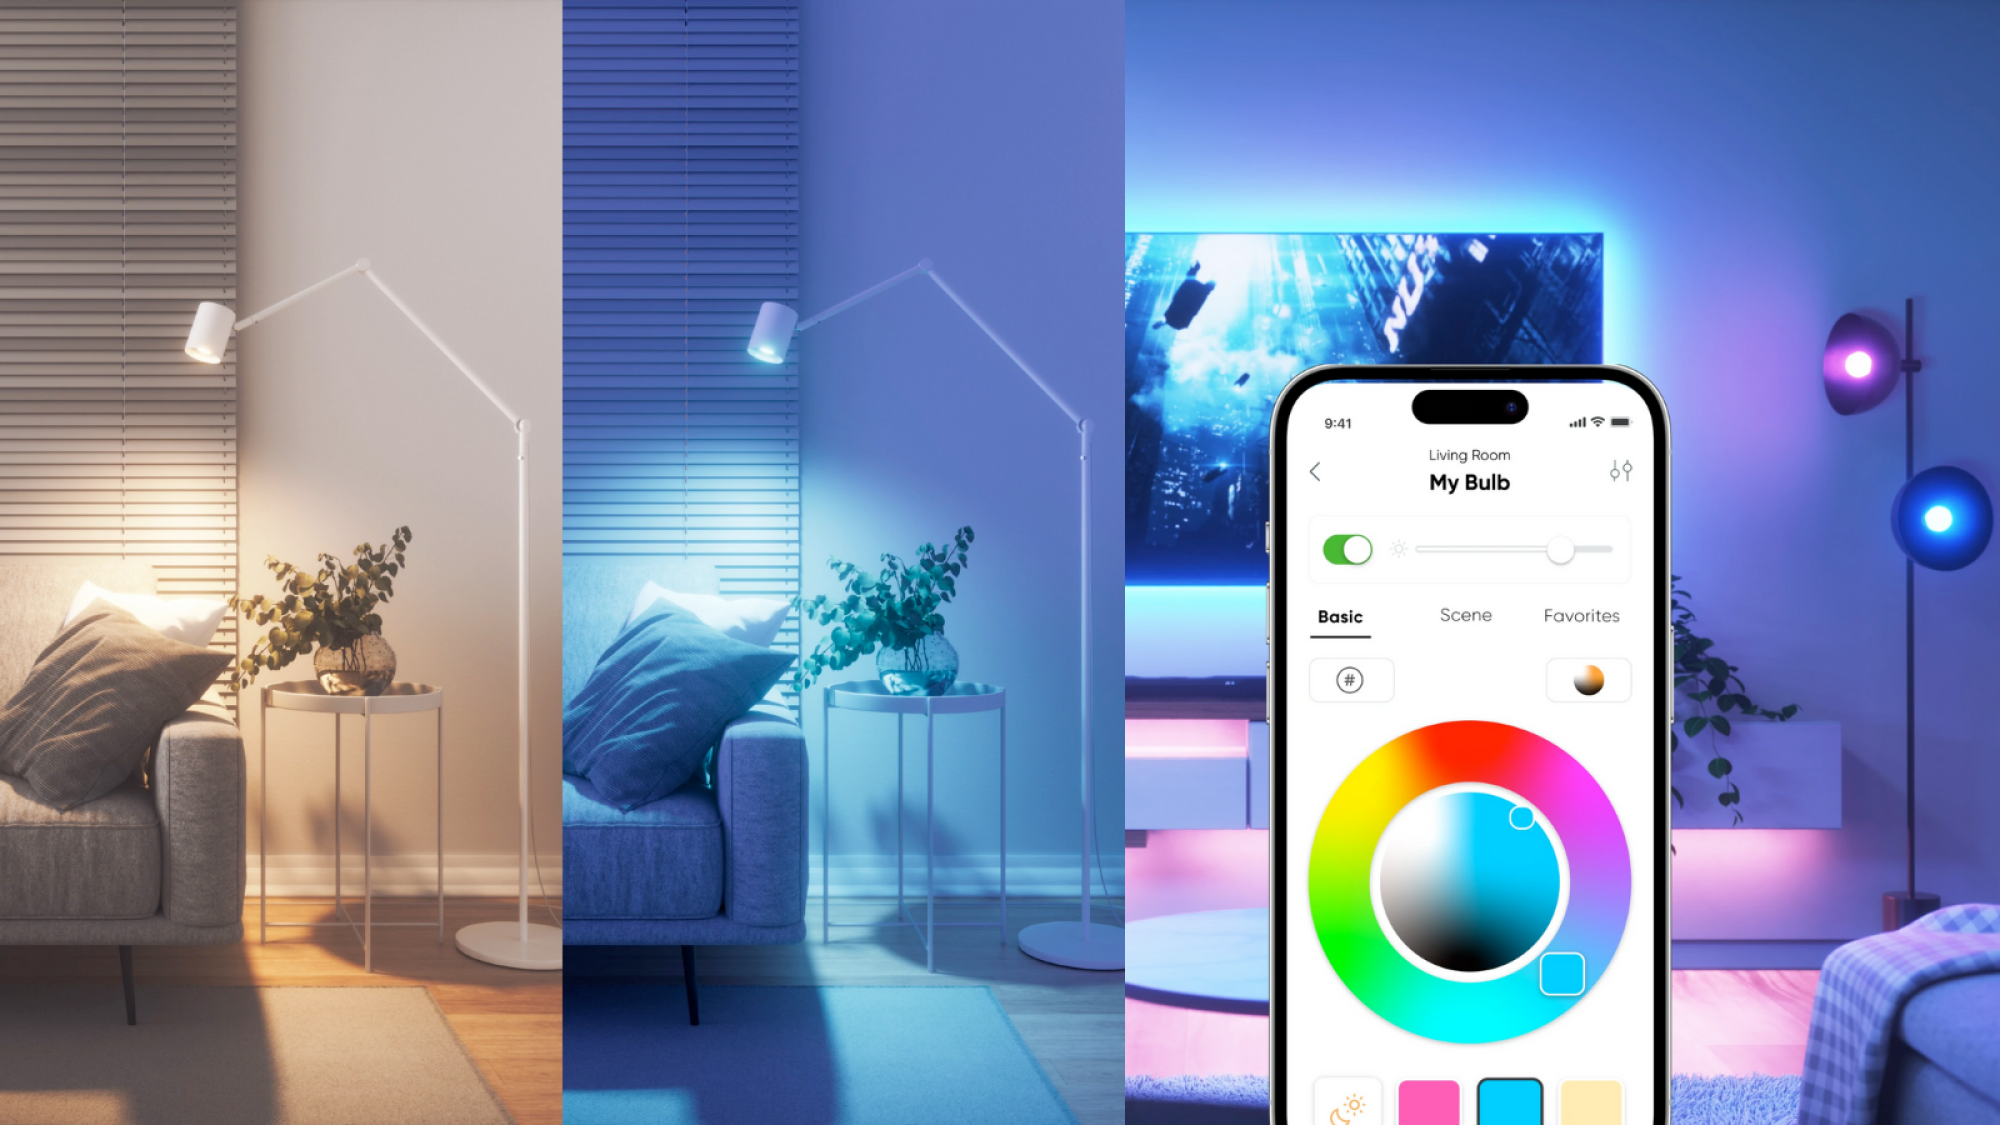 A composite of images of lamps with Nanoleaf Essential bulbs in them, displaying lighting of different colours. There is also a smartphone showing the Nanoleaf app.